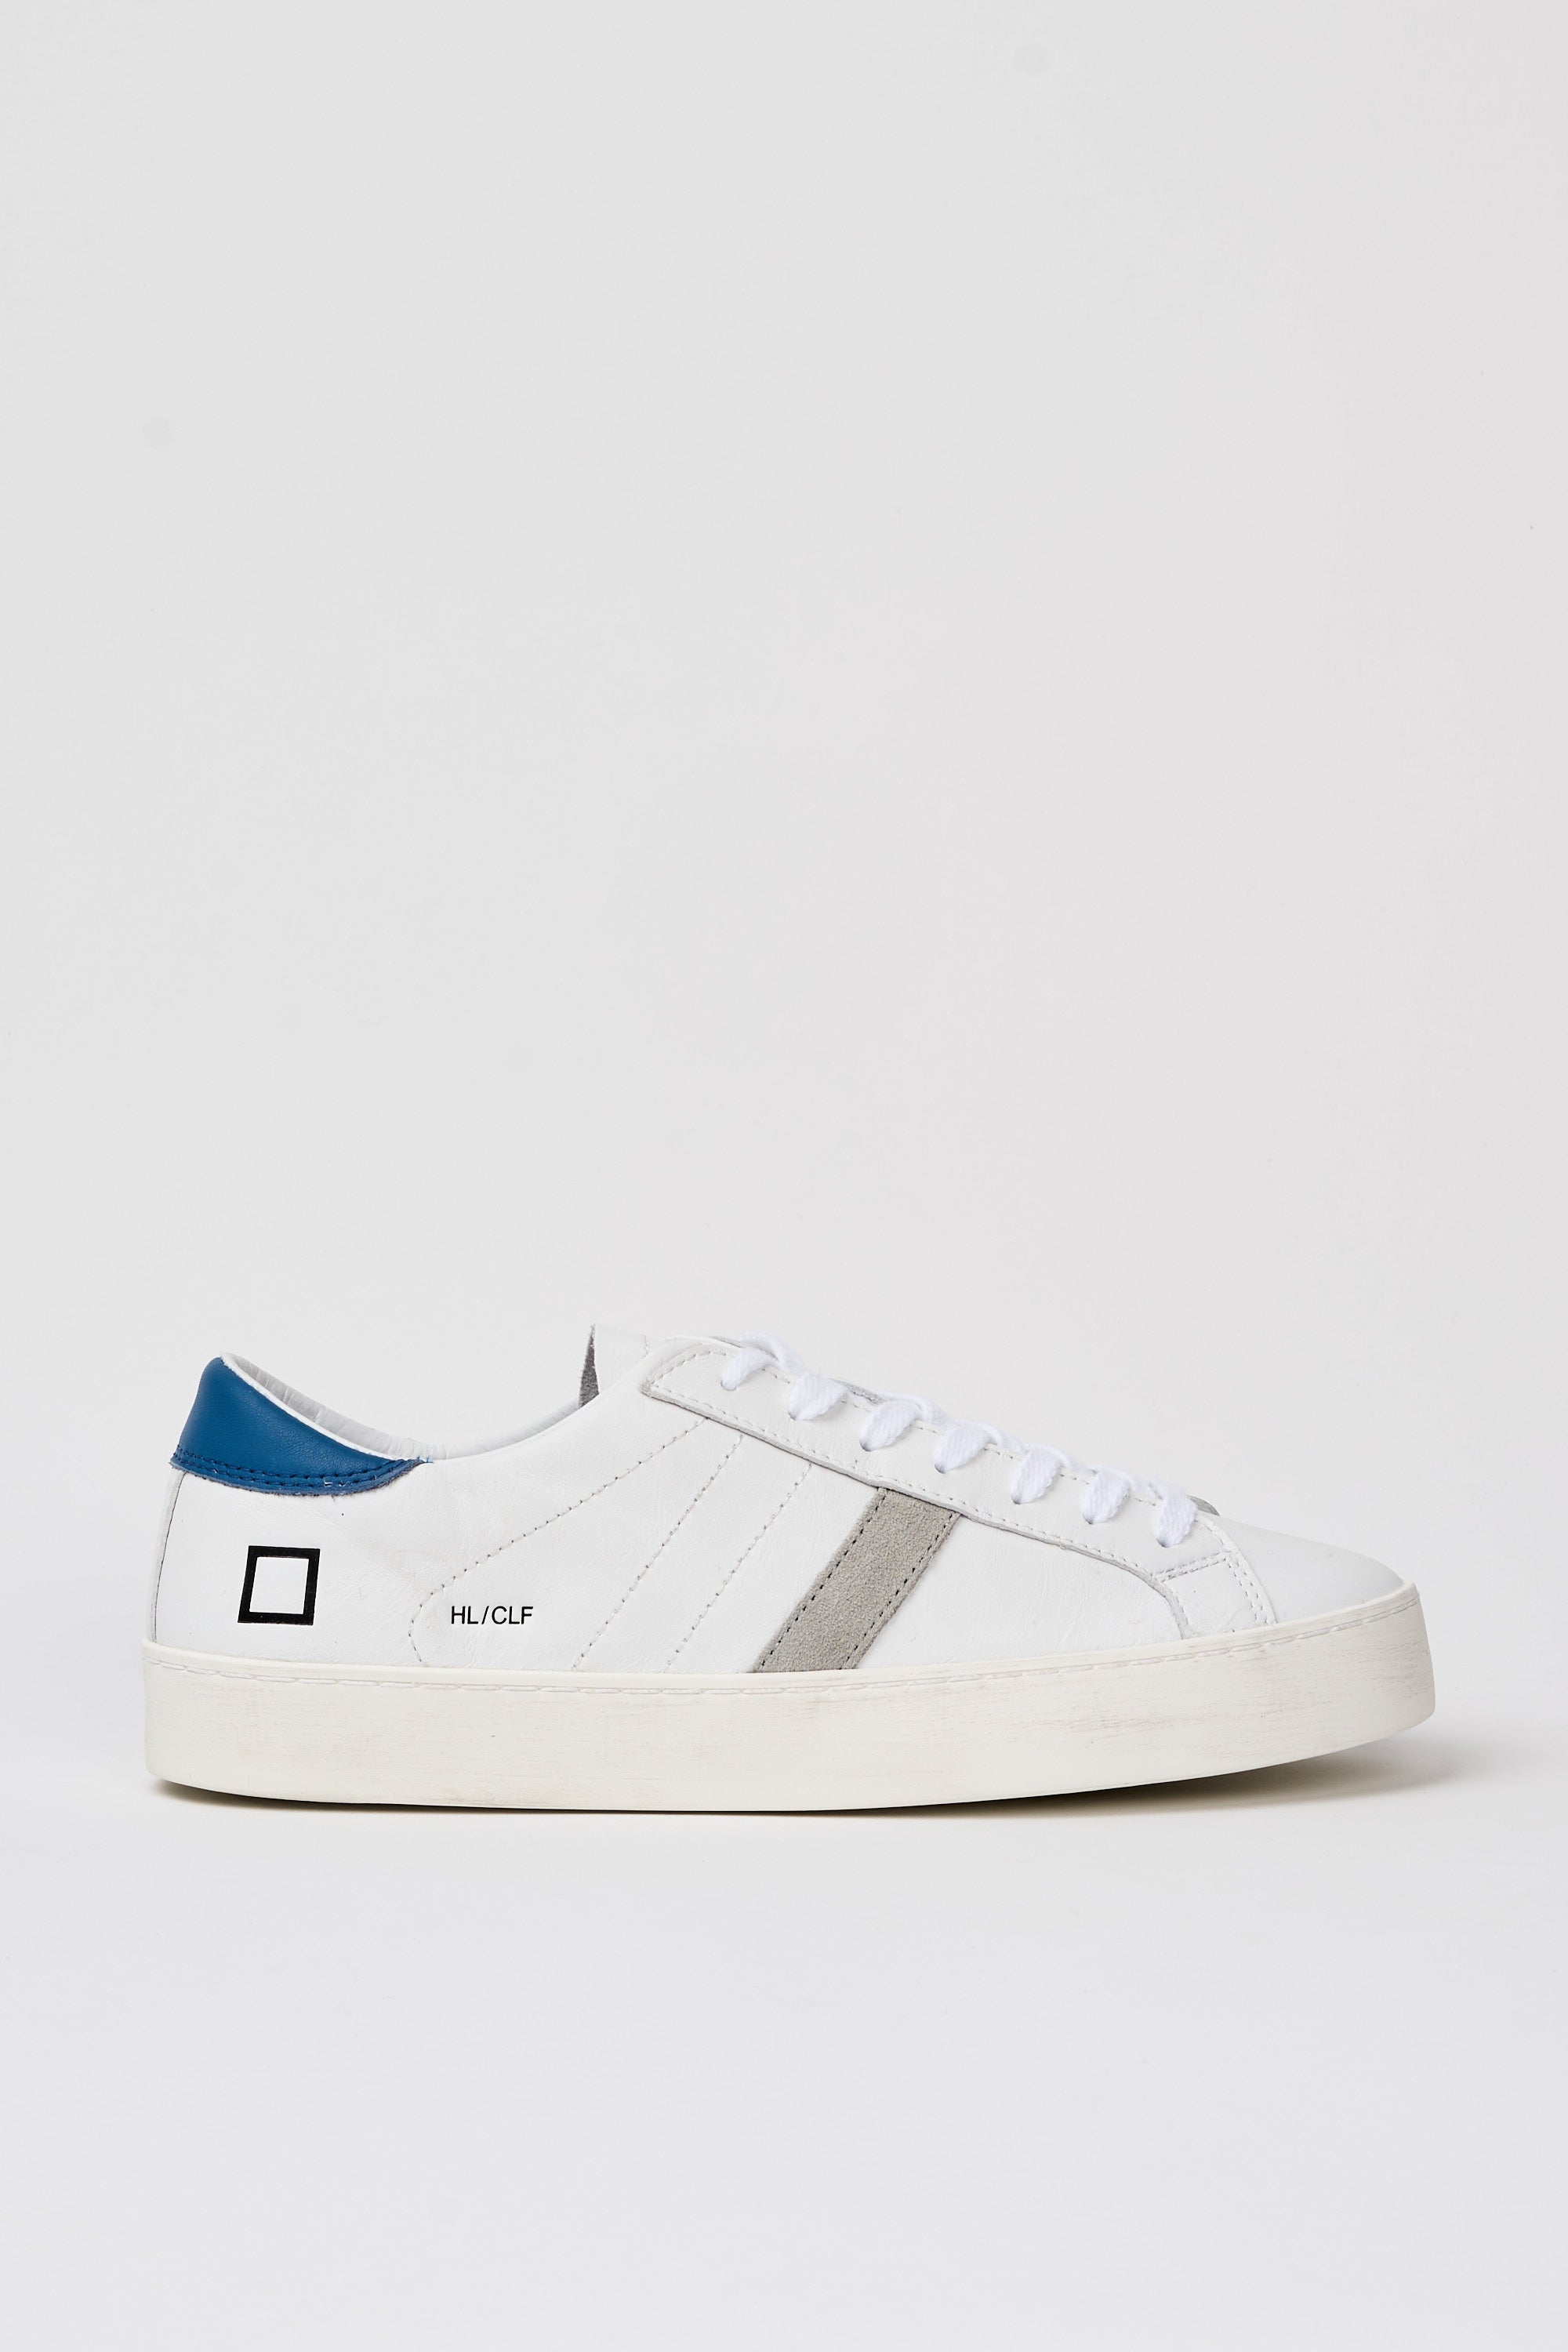 D.A.T.E. Sneaker Hill Leather/Suede White/Blue-1